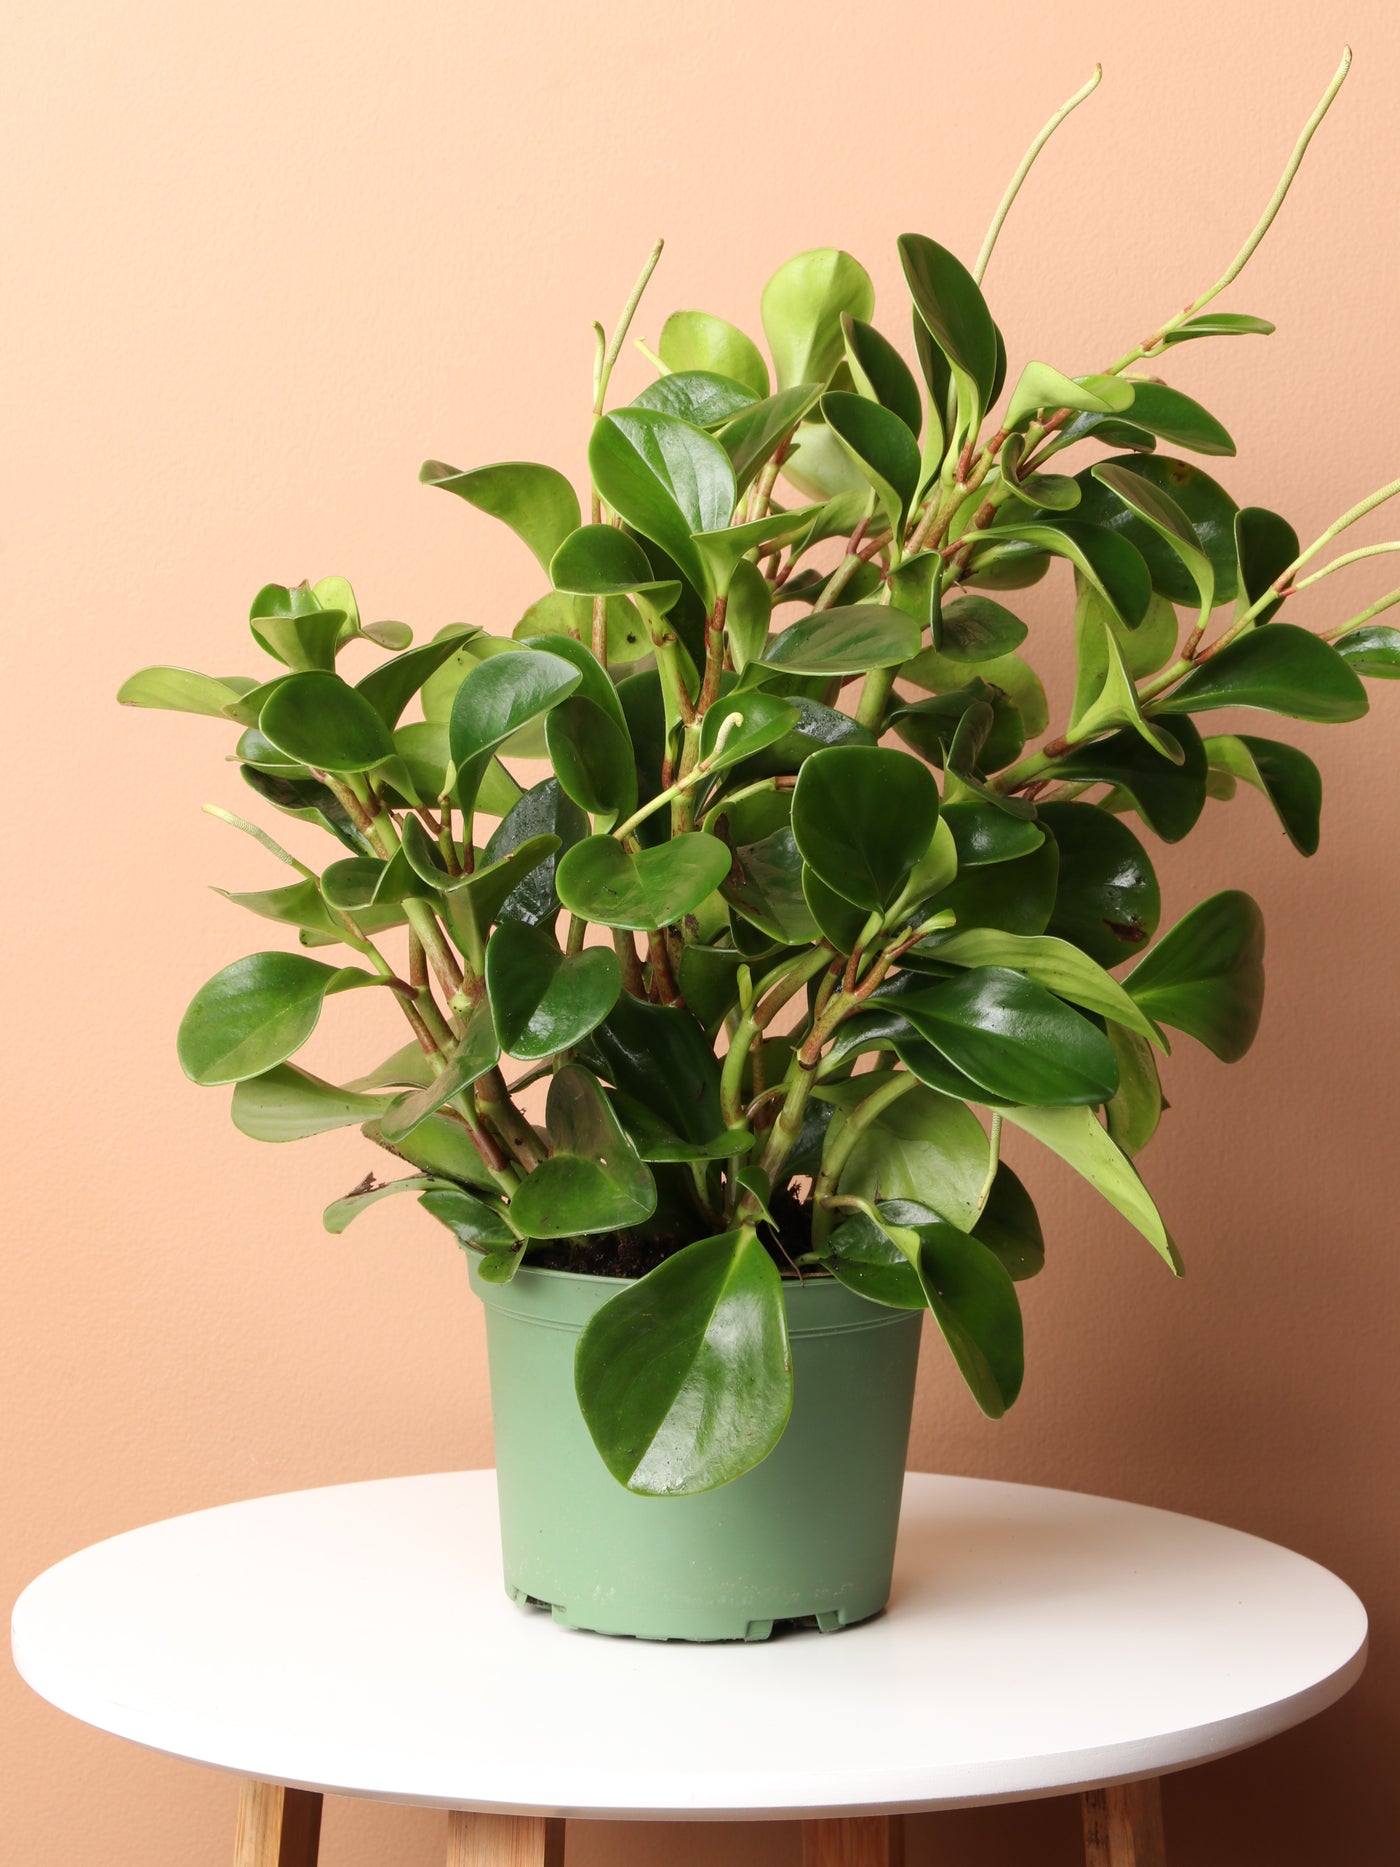 Peperomia Obtusifolia Low Light Plants Houseplants Delivery, 54% OFF